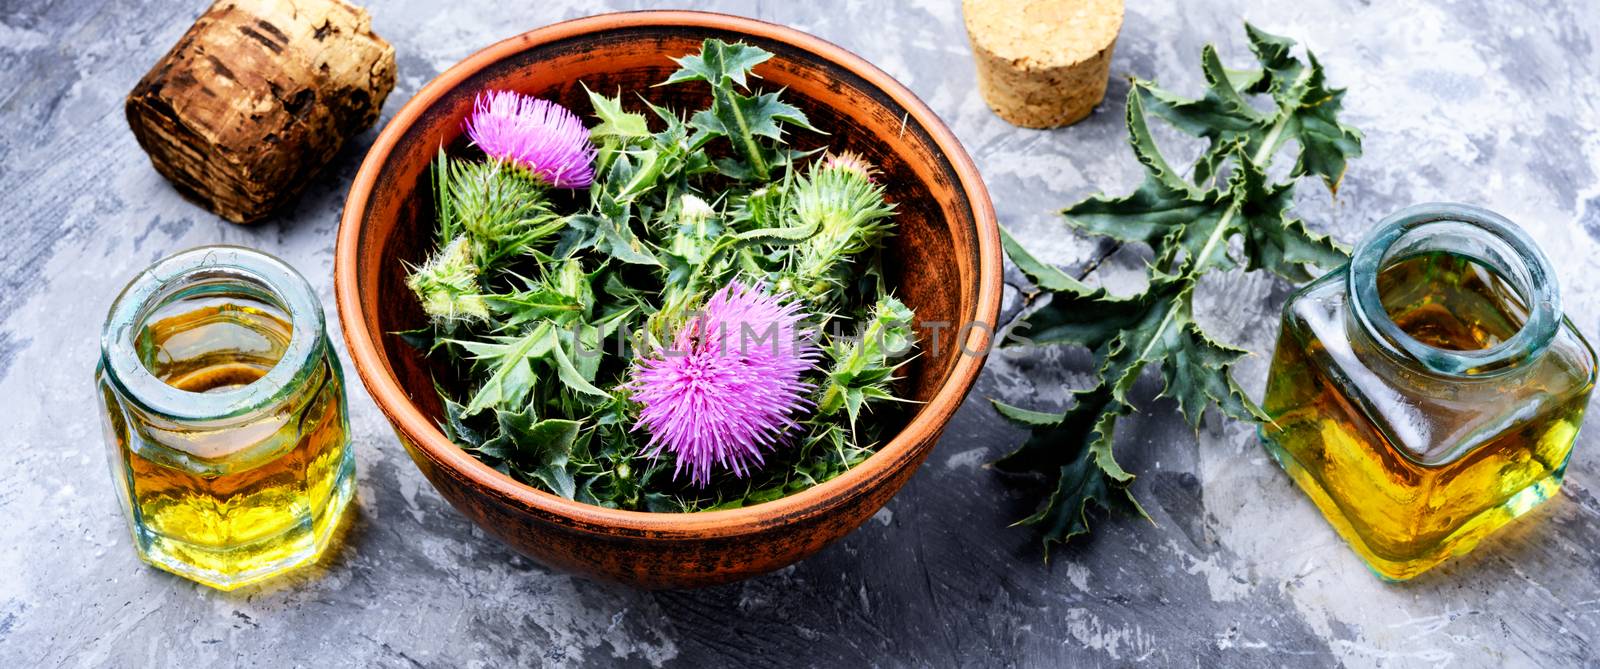 Healing plant of thistle and medical bottles with extract.Herbalism